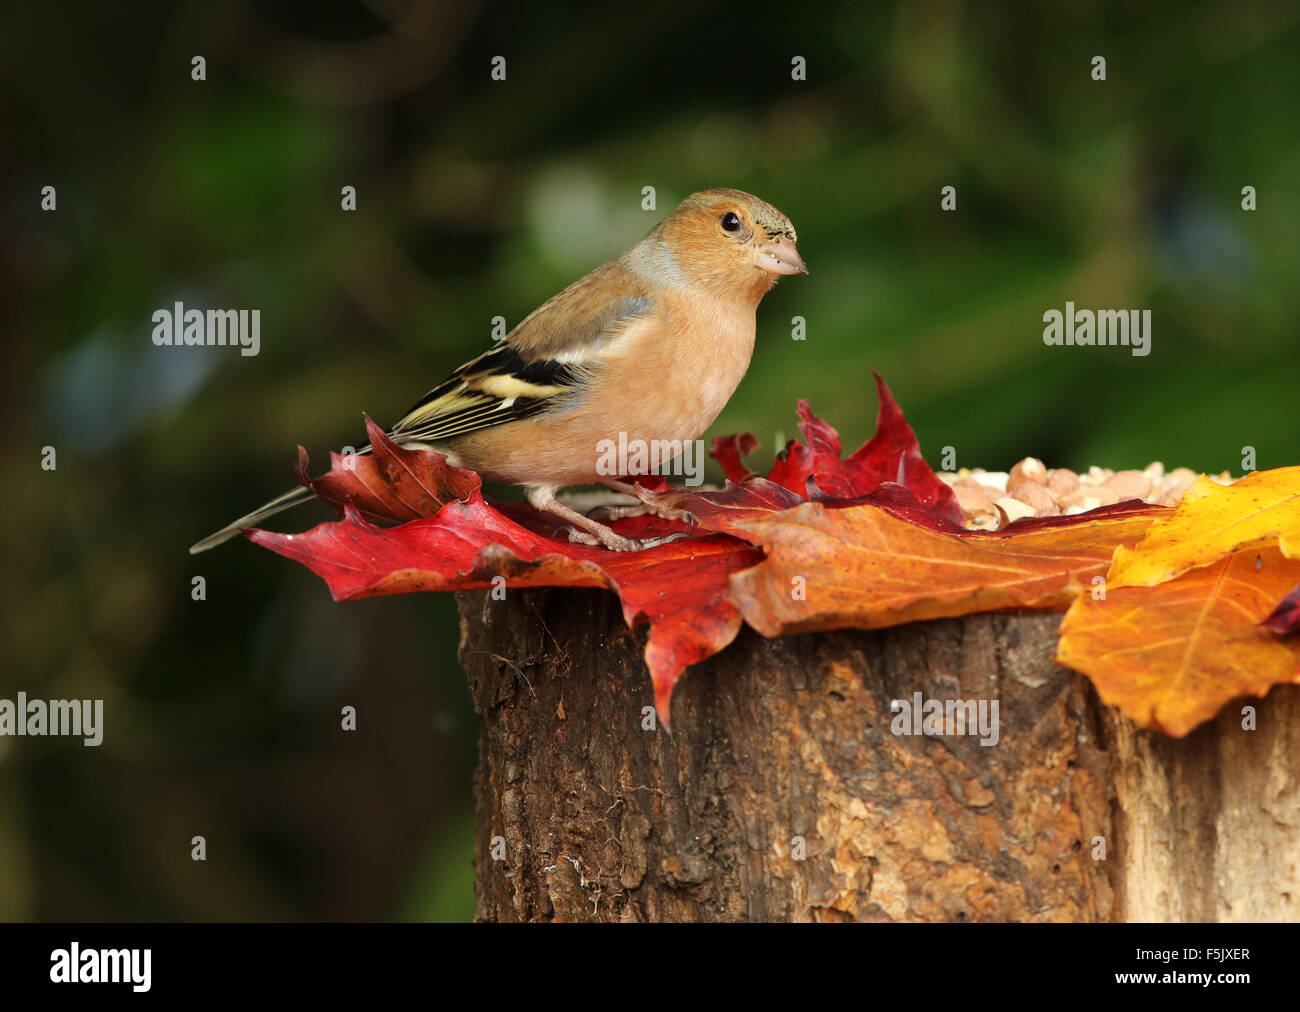 Close up of a male Chaffinch on a tree stump with autumn leaves Stock Photo